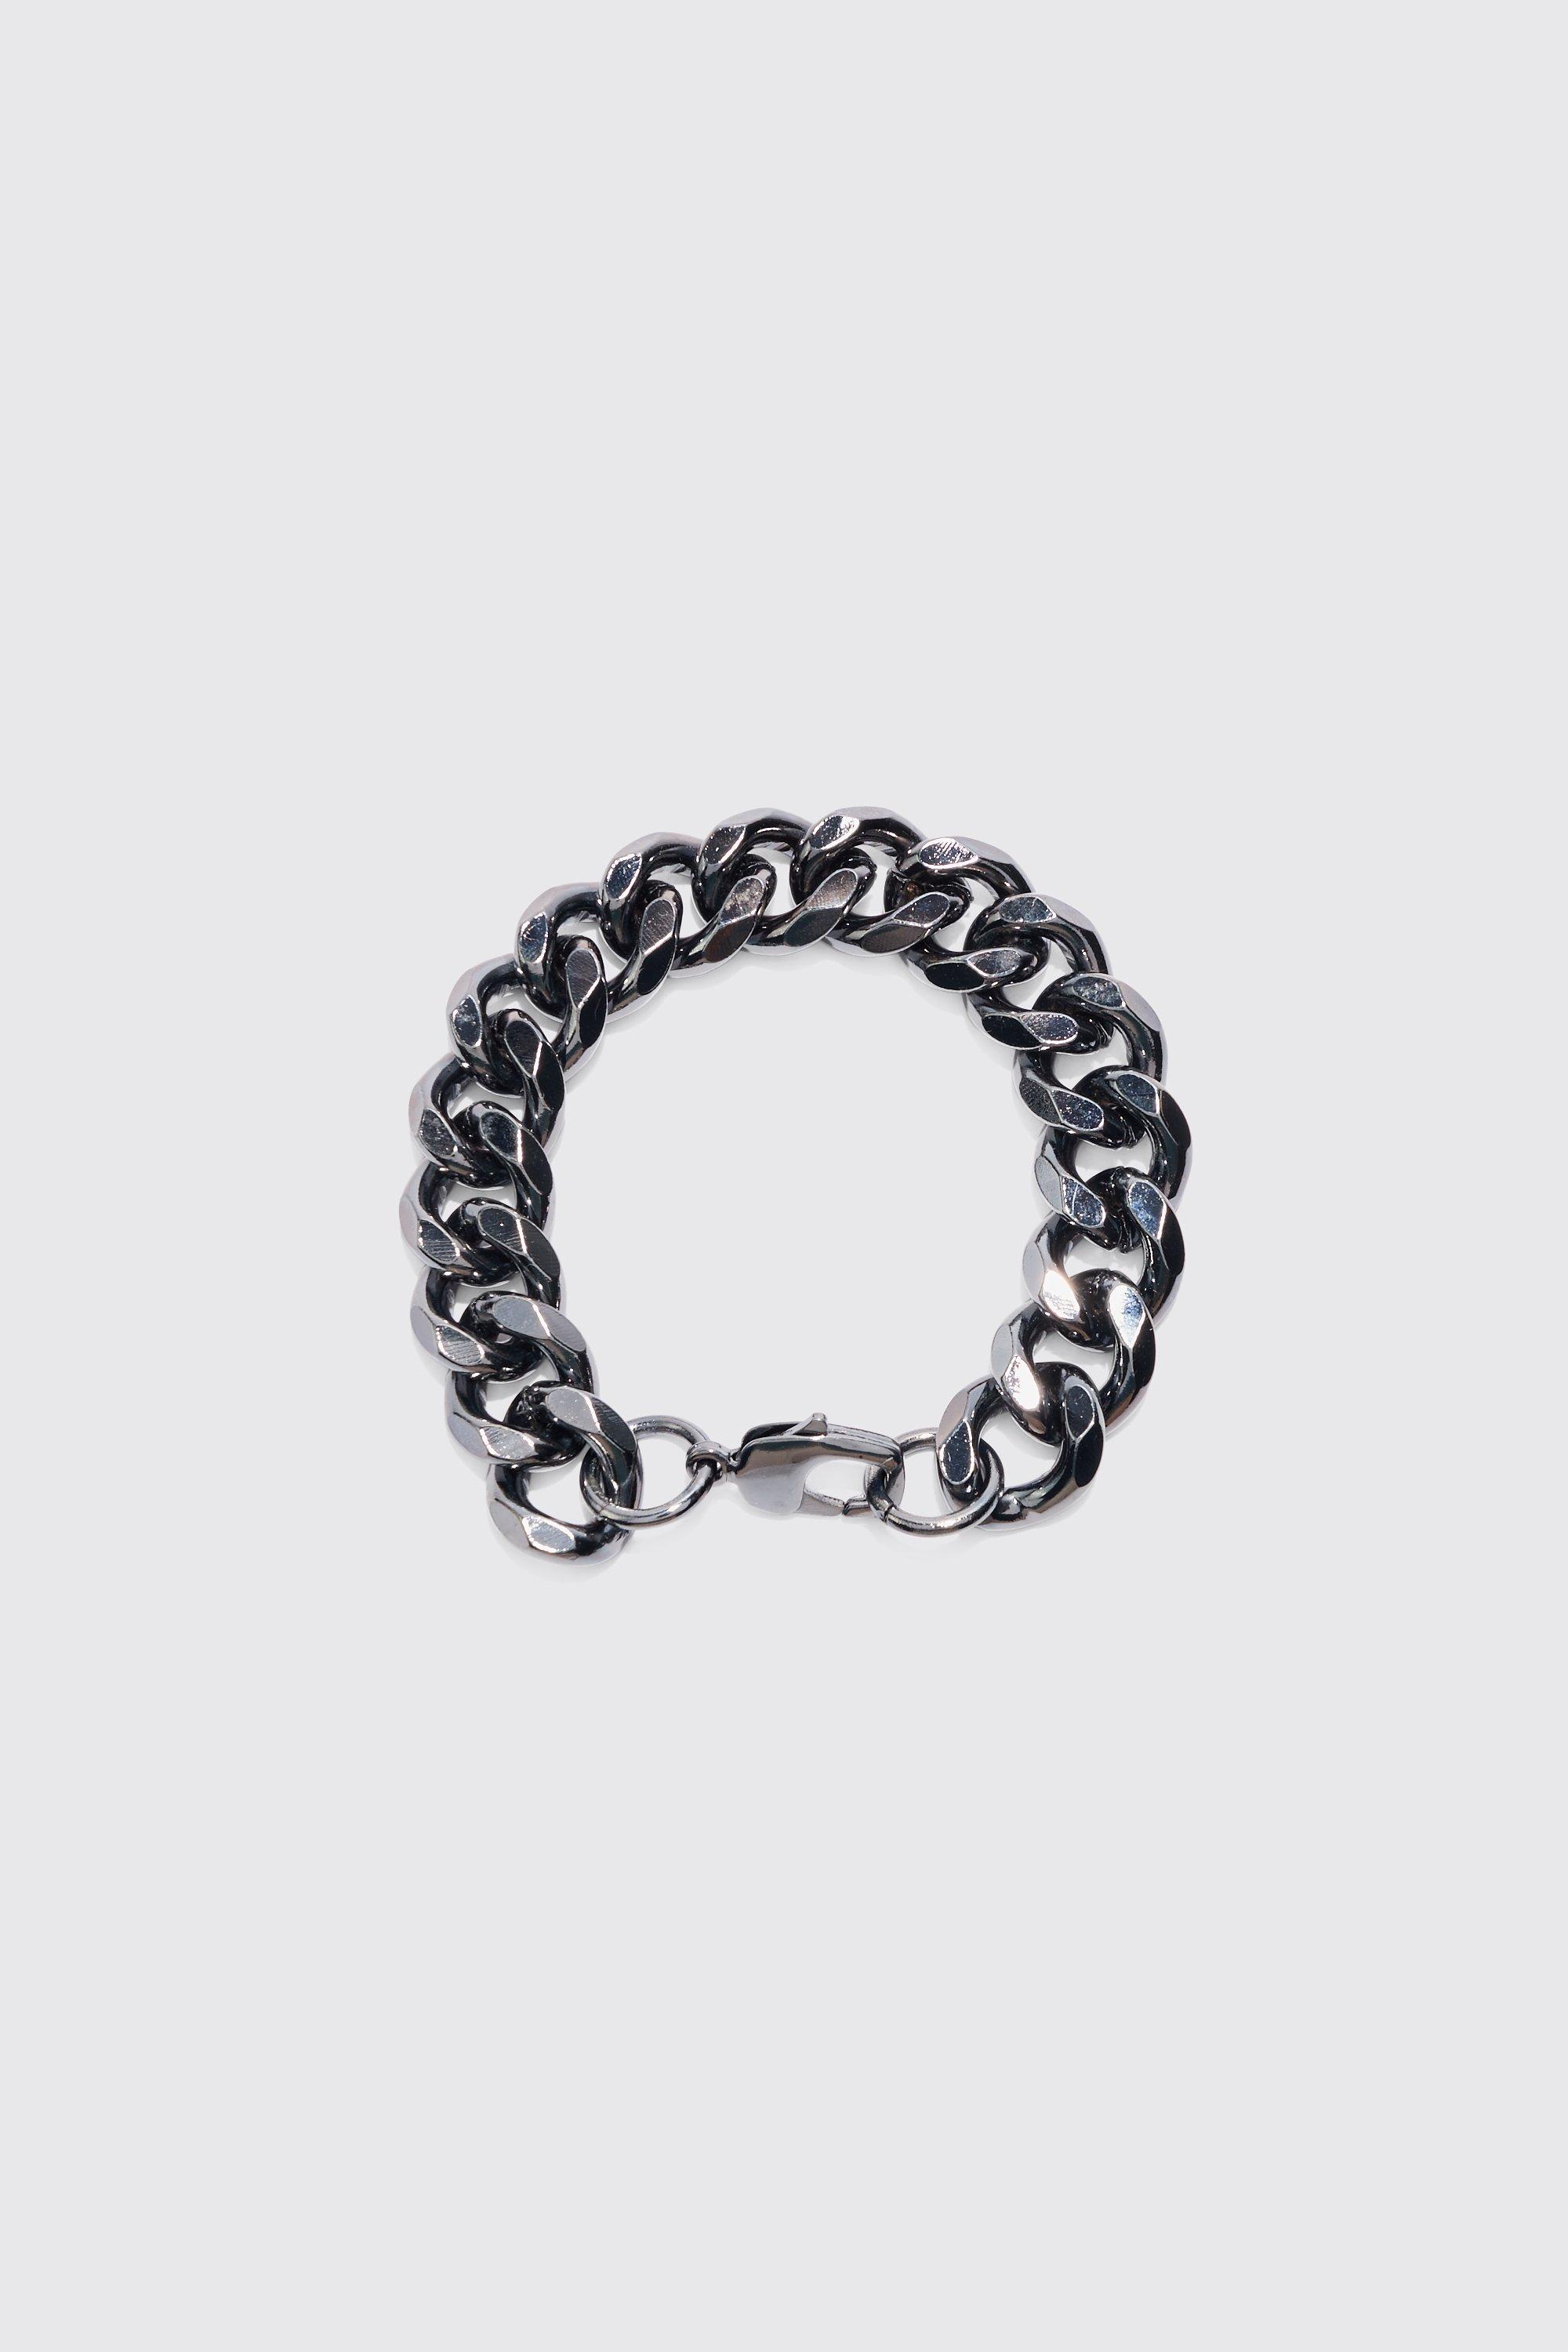 chunky chain bracelet in gunmetal homme - gris - one size, gris